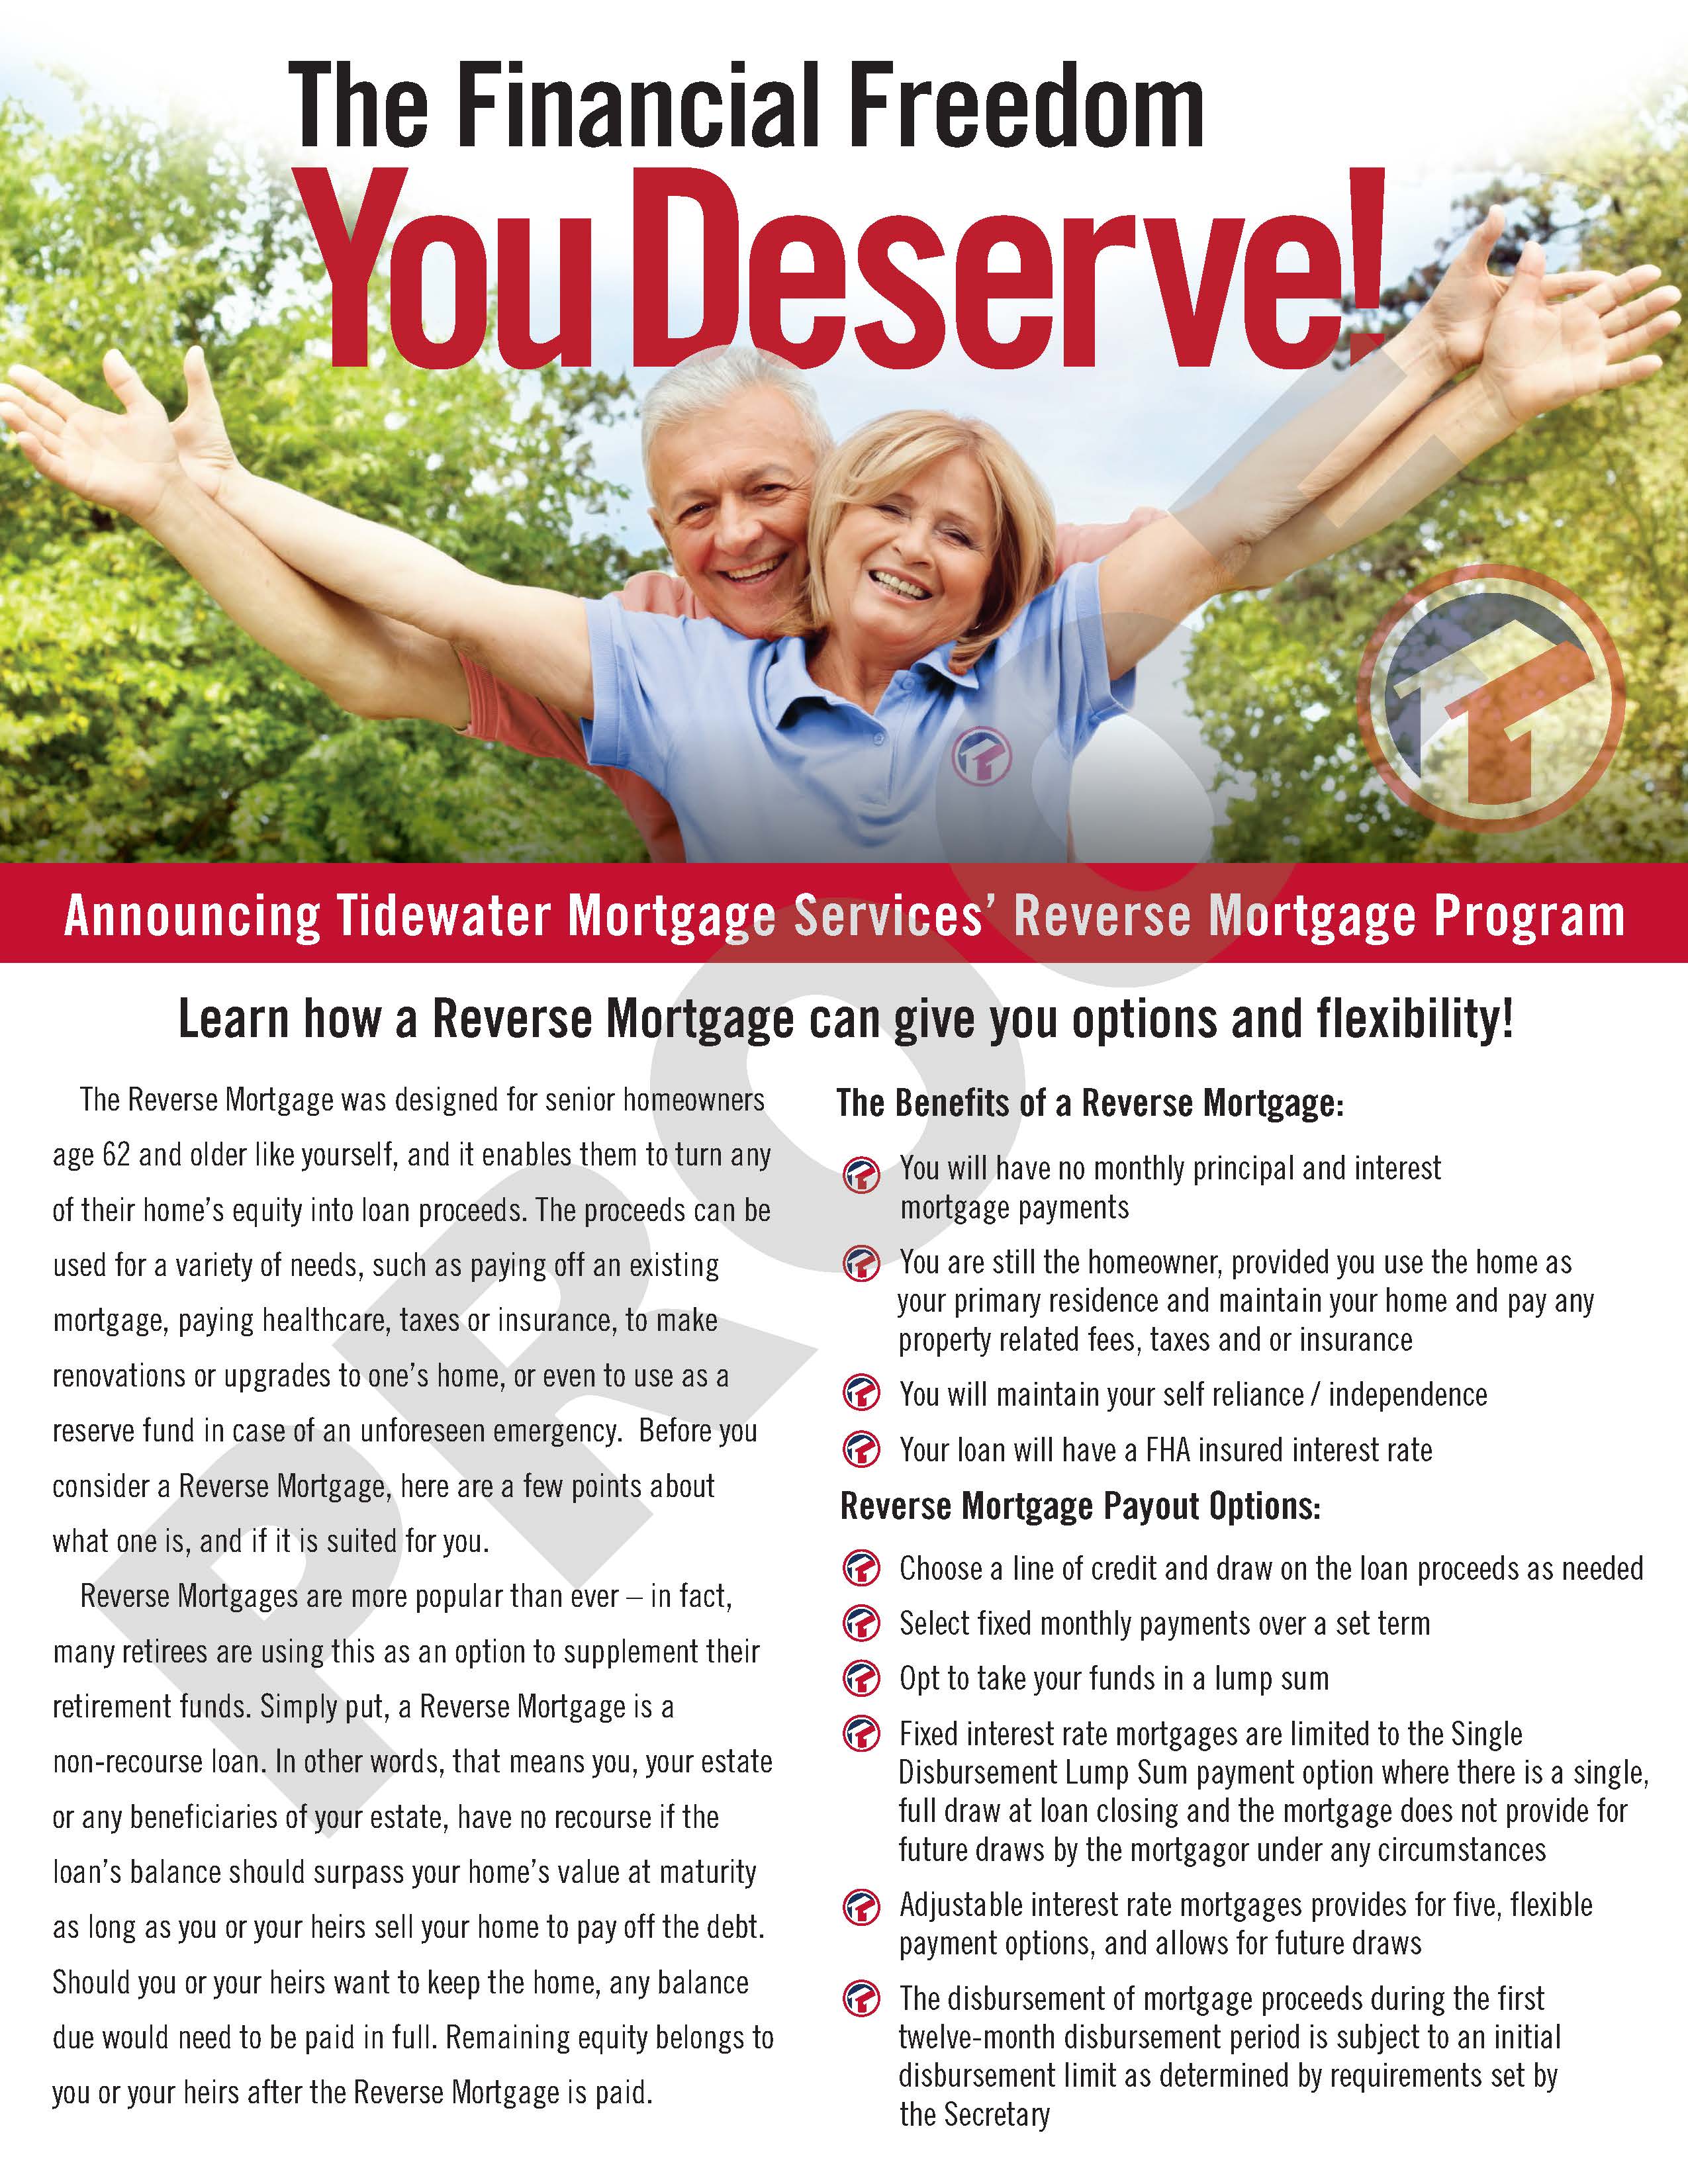 reversemortgage 062018 Page 1 Tidewater Mortgage Services Inc